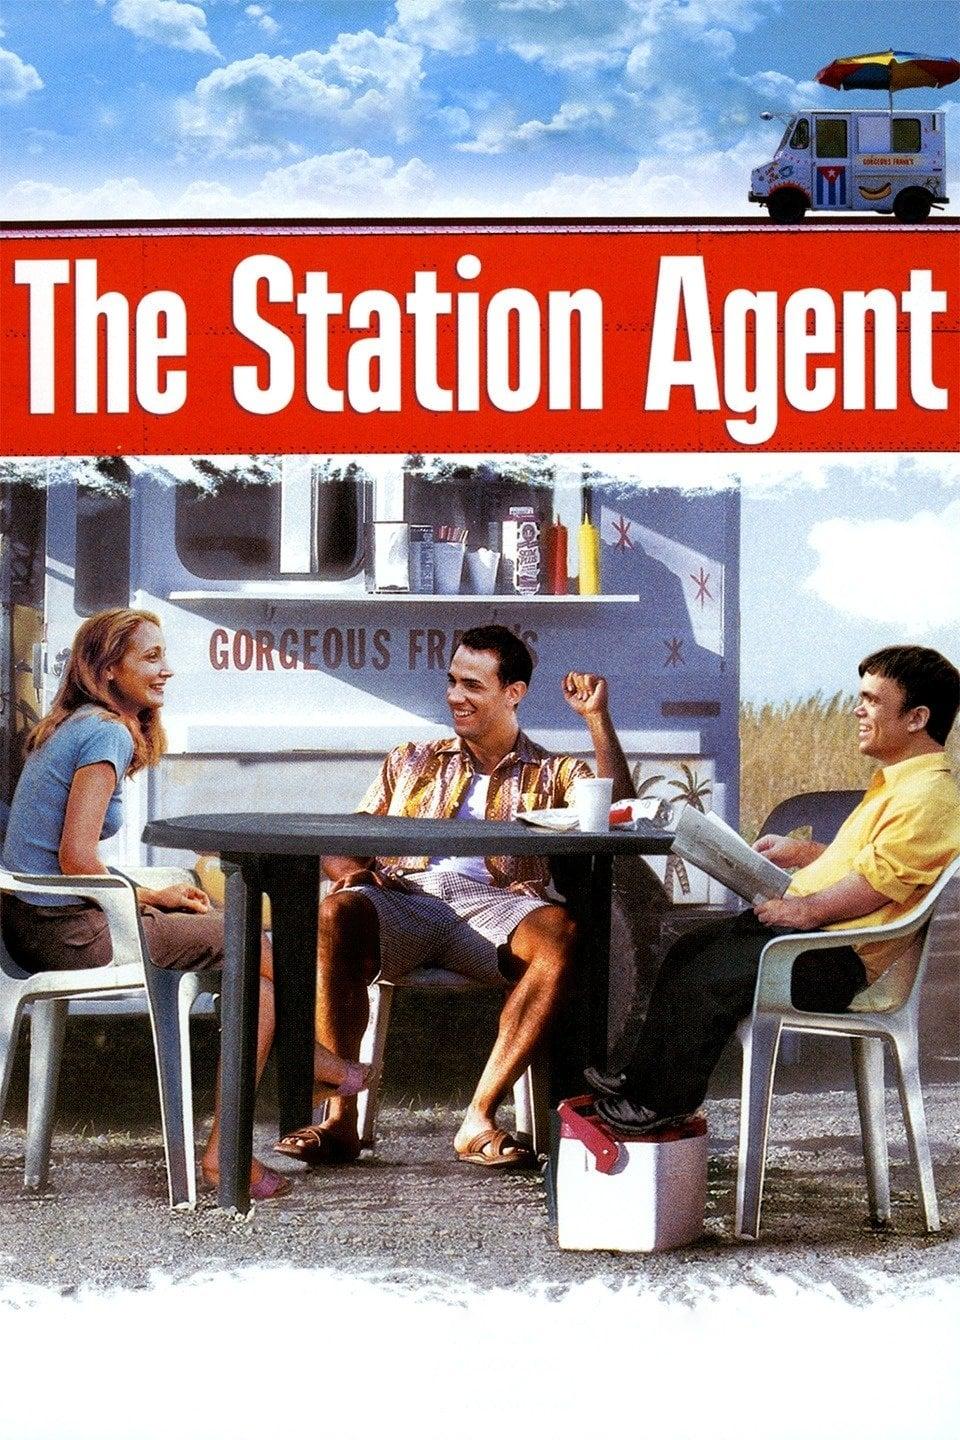 The Station Agent poster